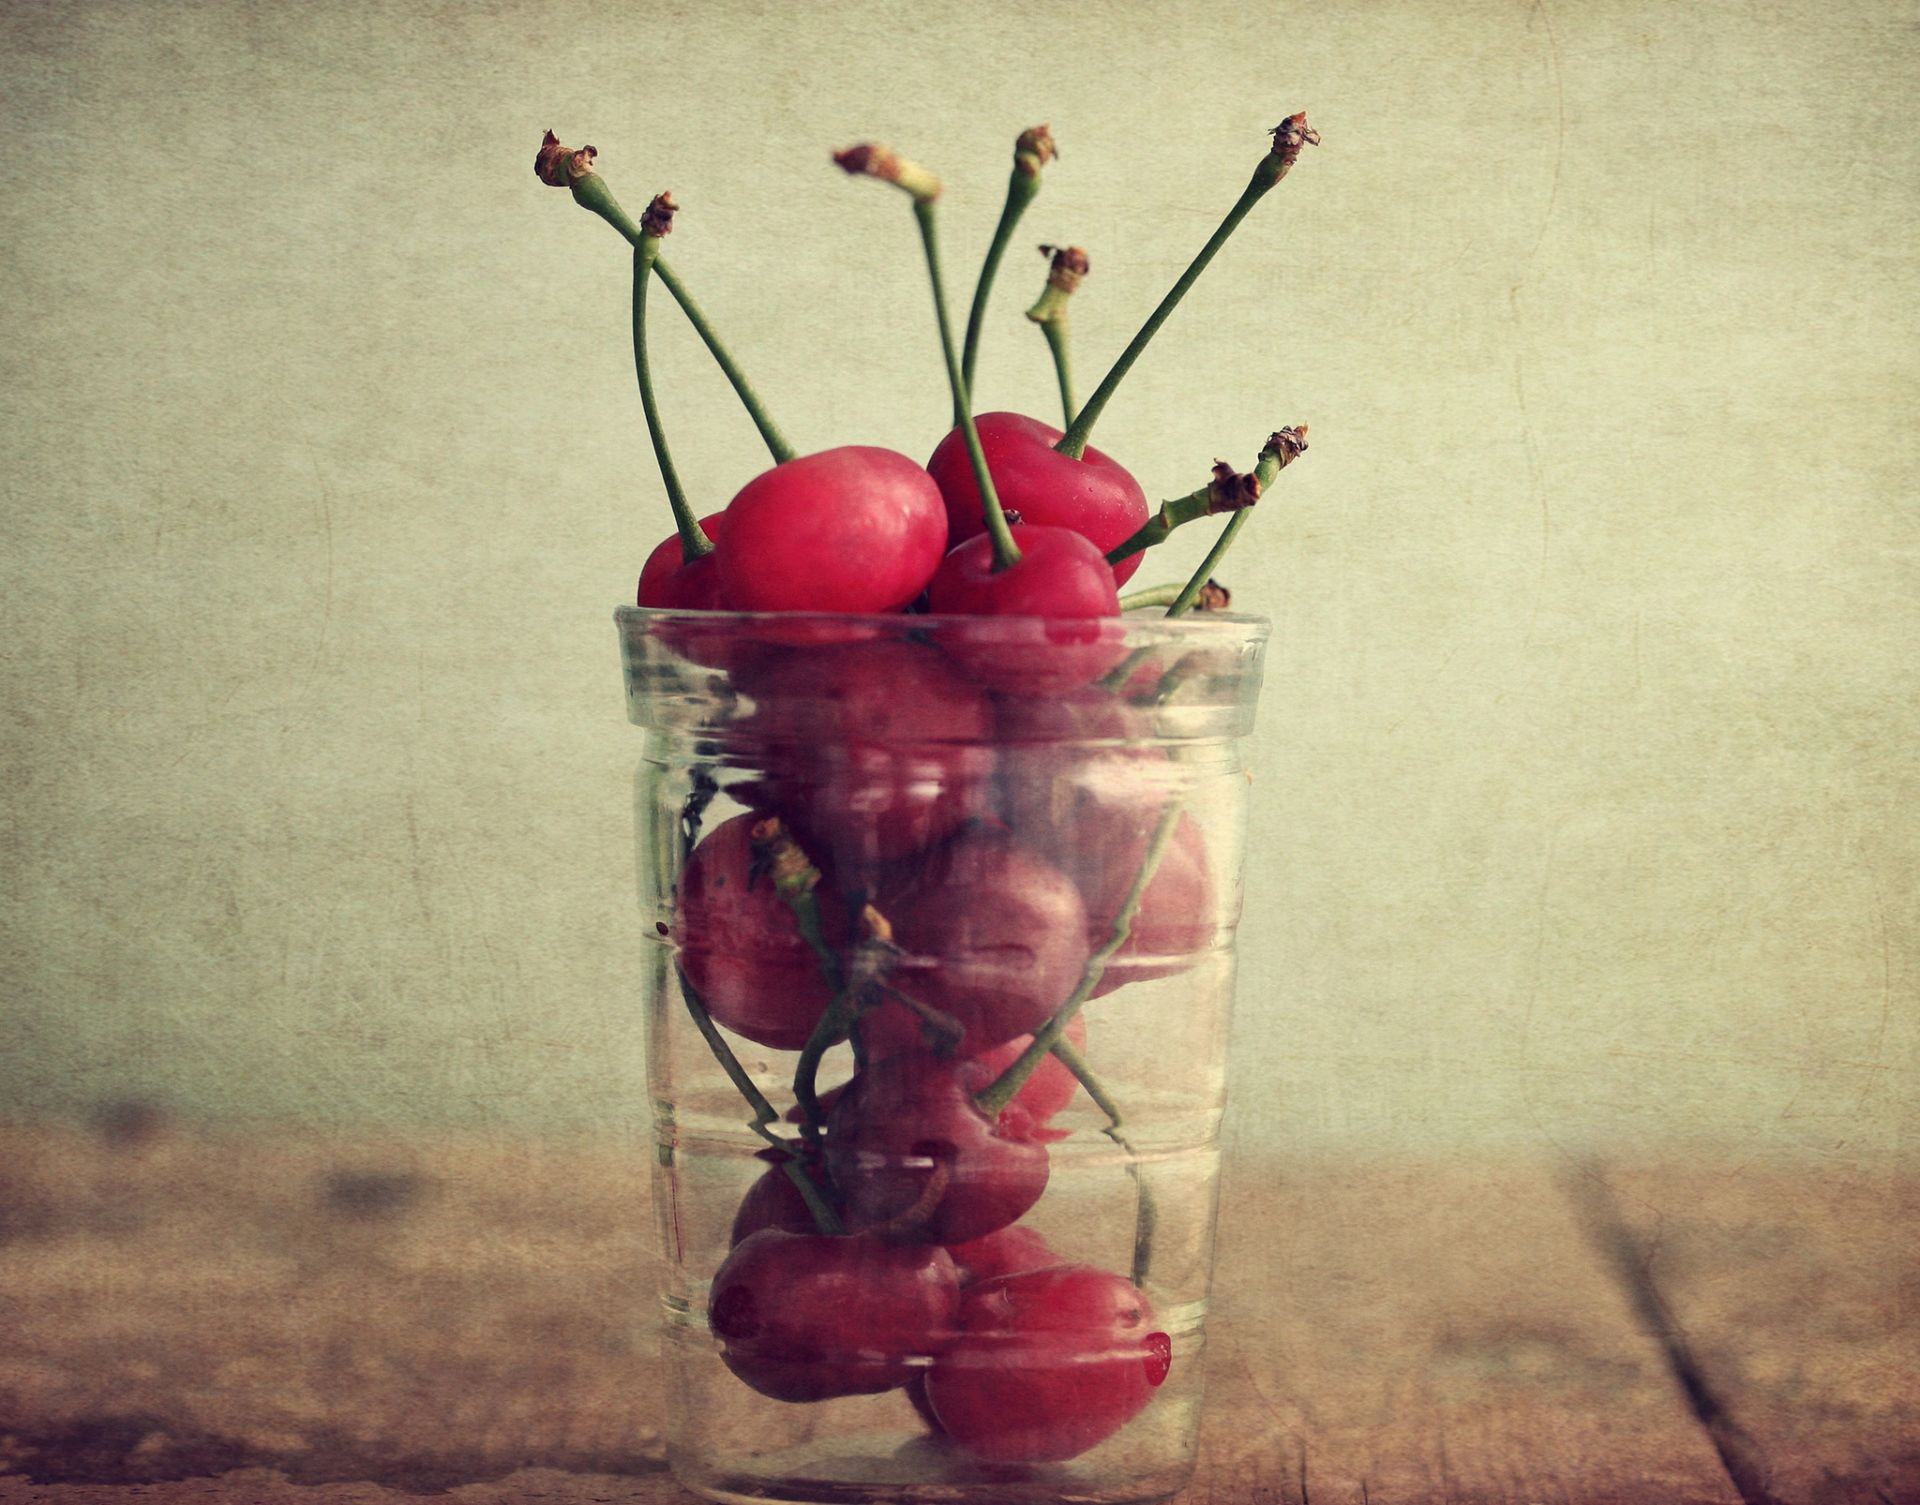 122 Cherry HD Wallpapers Backgrounds - Wallpaper Abyss